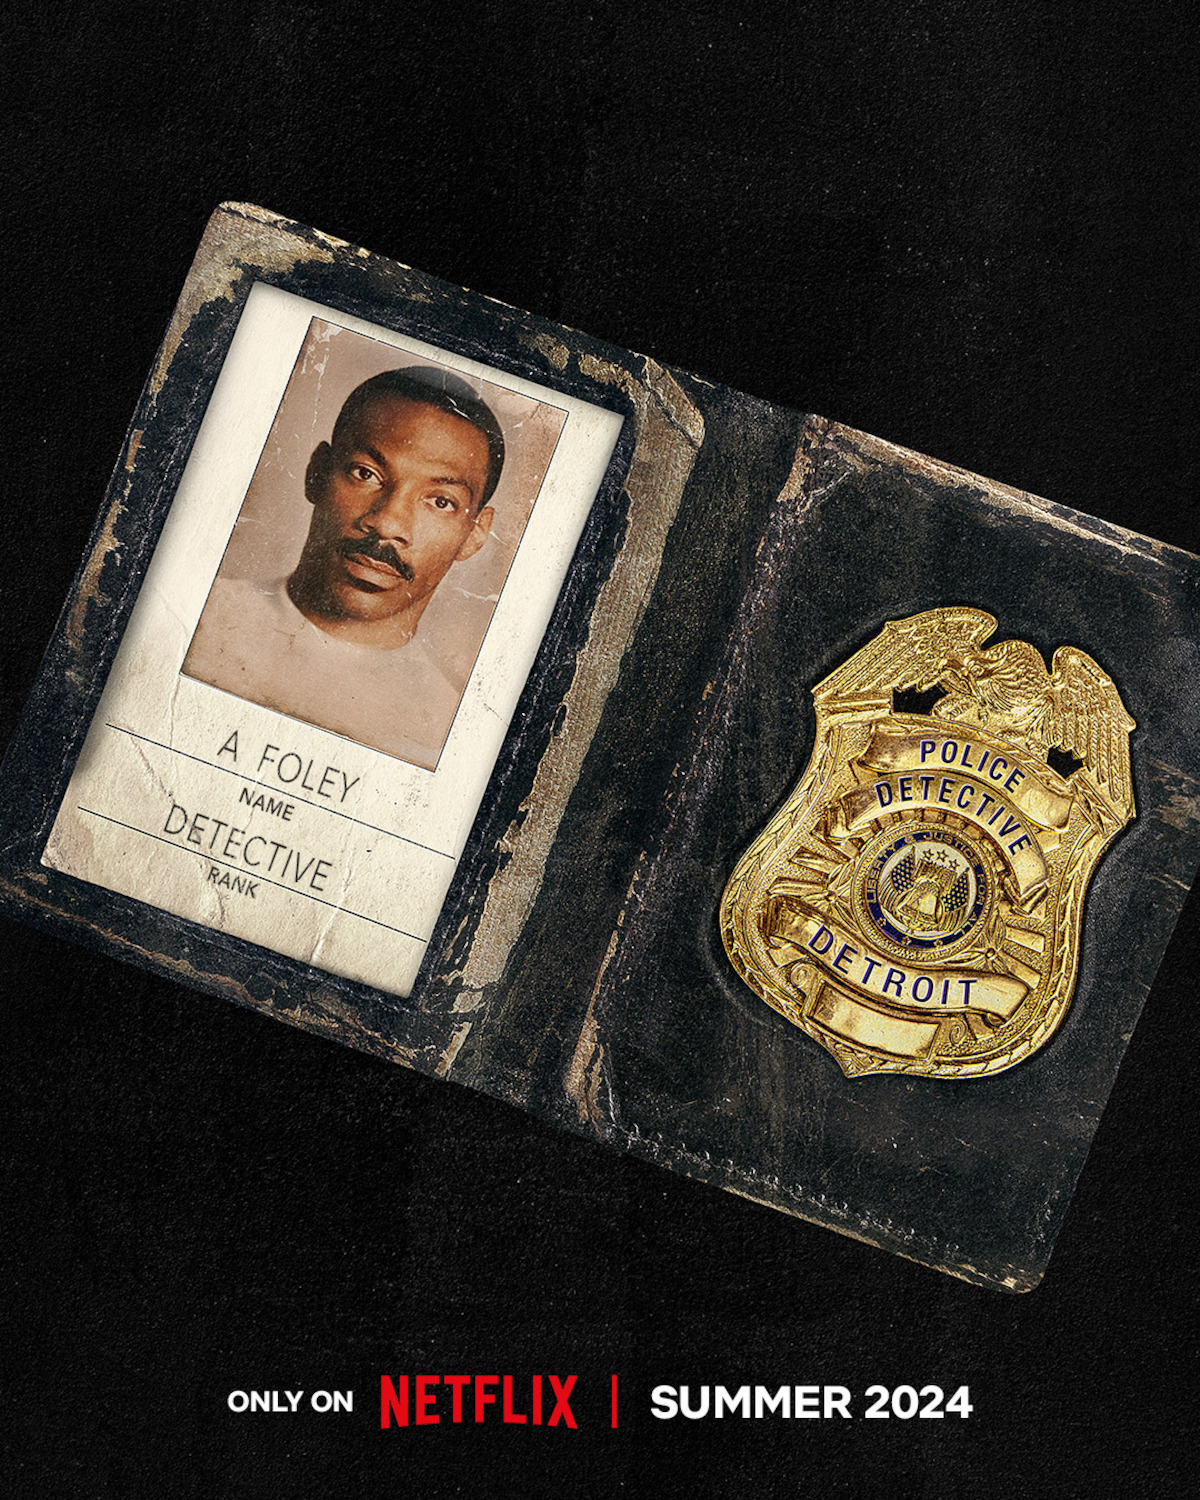 A battered wallet with a Detroit police detective badge and a photo ID bearing Eddie Murphy’s face and the name “A Foley” under the words “Person of Interest: If you have any information, please contact the Beverly Hills Police Dept.